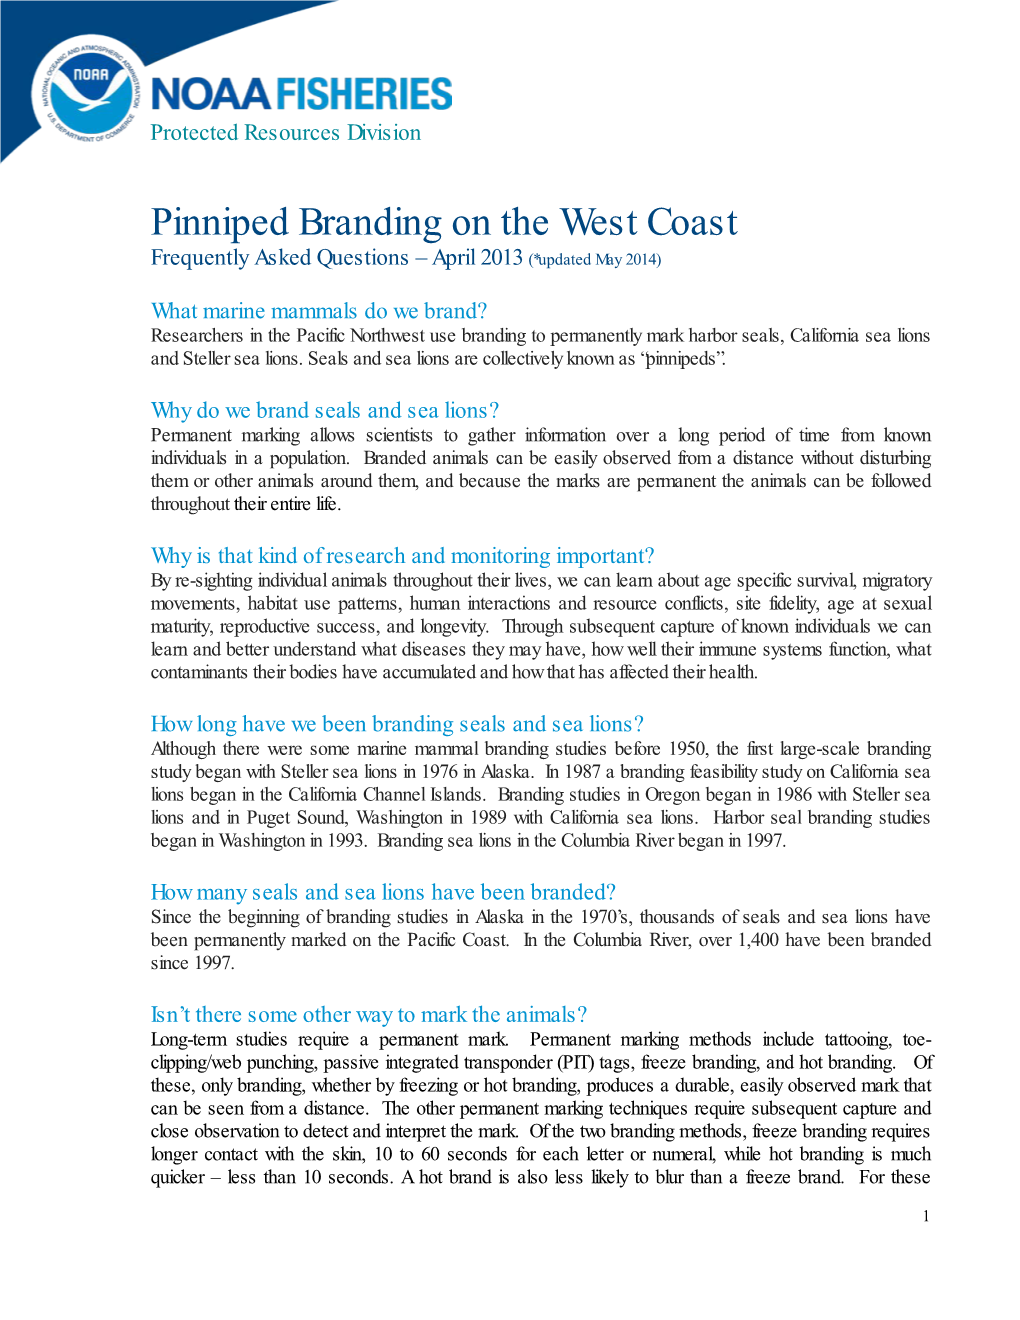 Pinniped Branding: Frequently Asked Questions